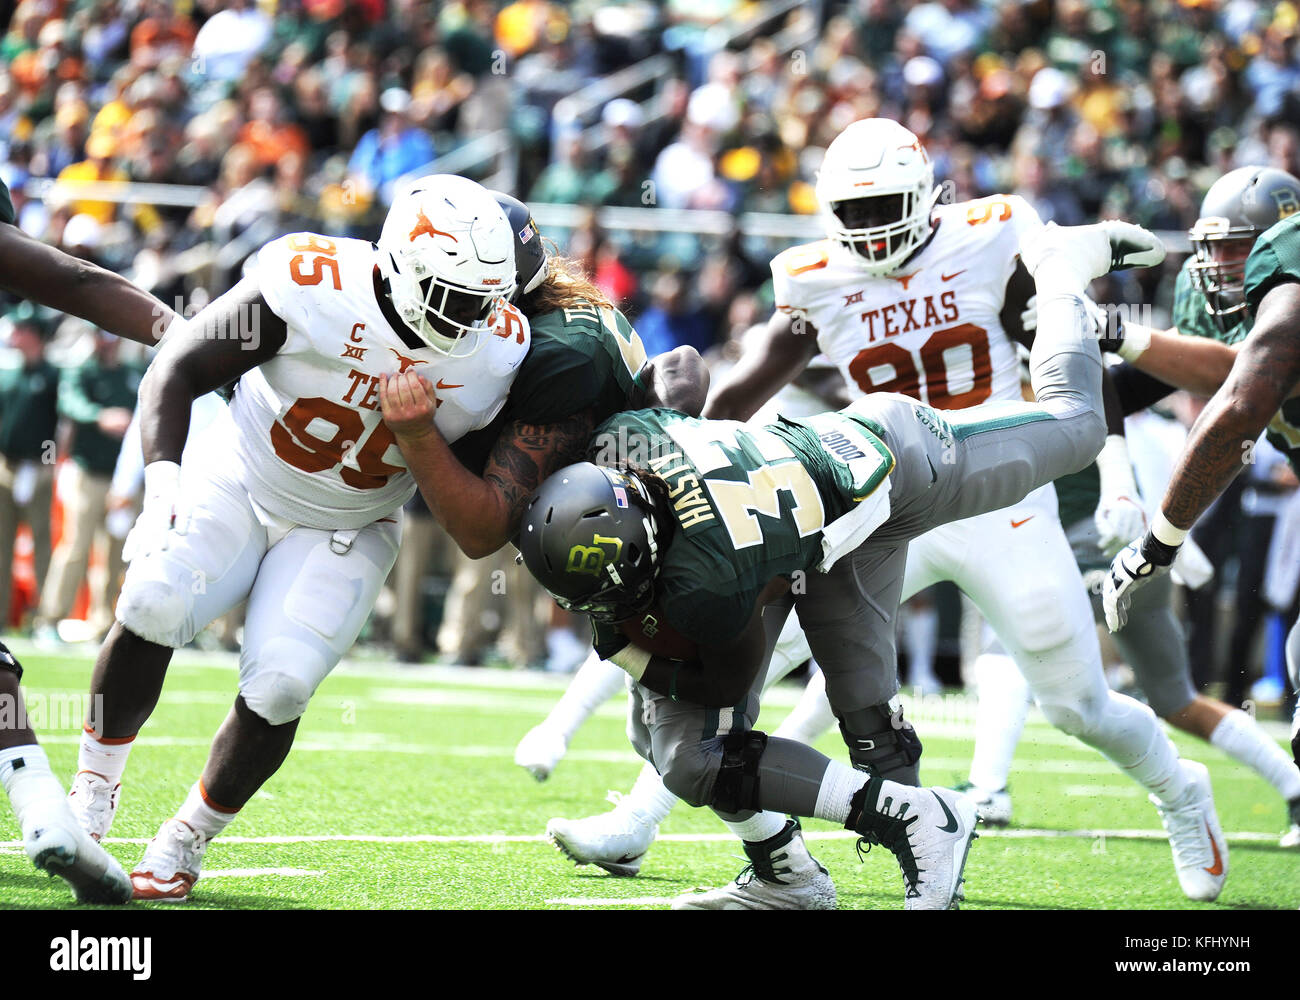 Waco, Texas, USA. 28th Oct, 2017. Baylor Bears running back JaMycal Hasty (33) tackled by Texas Longhorns defensive lineman Poona Ford (95) during the NCAA Football game between the Baylor Bears and the Texas Longhorns at McLane Stadium in Waco, Texas. Matthew Lynch/CSM/Alamy Live News Stock Photo